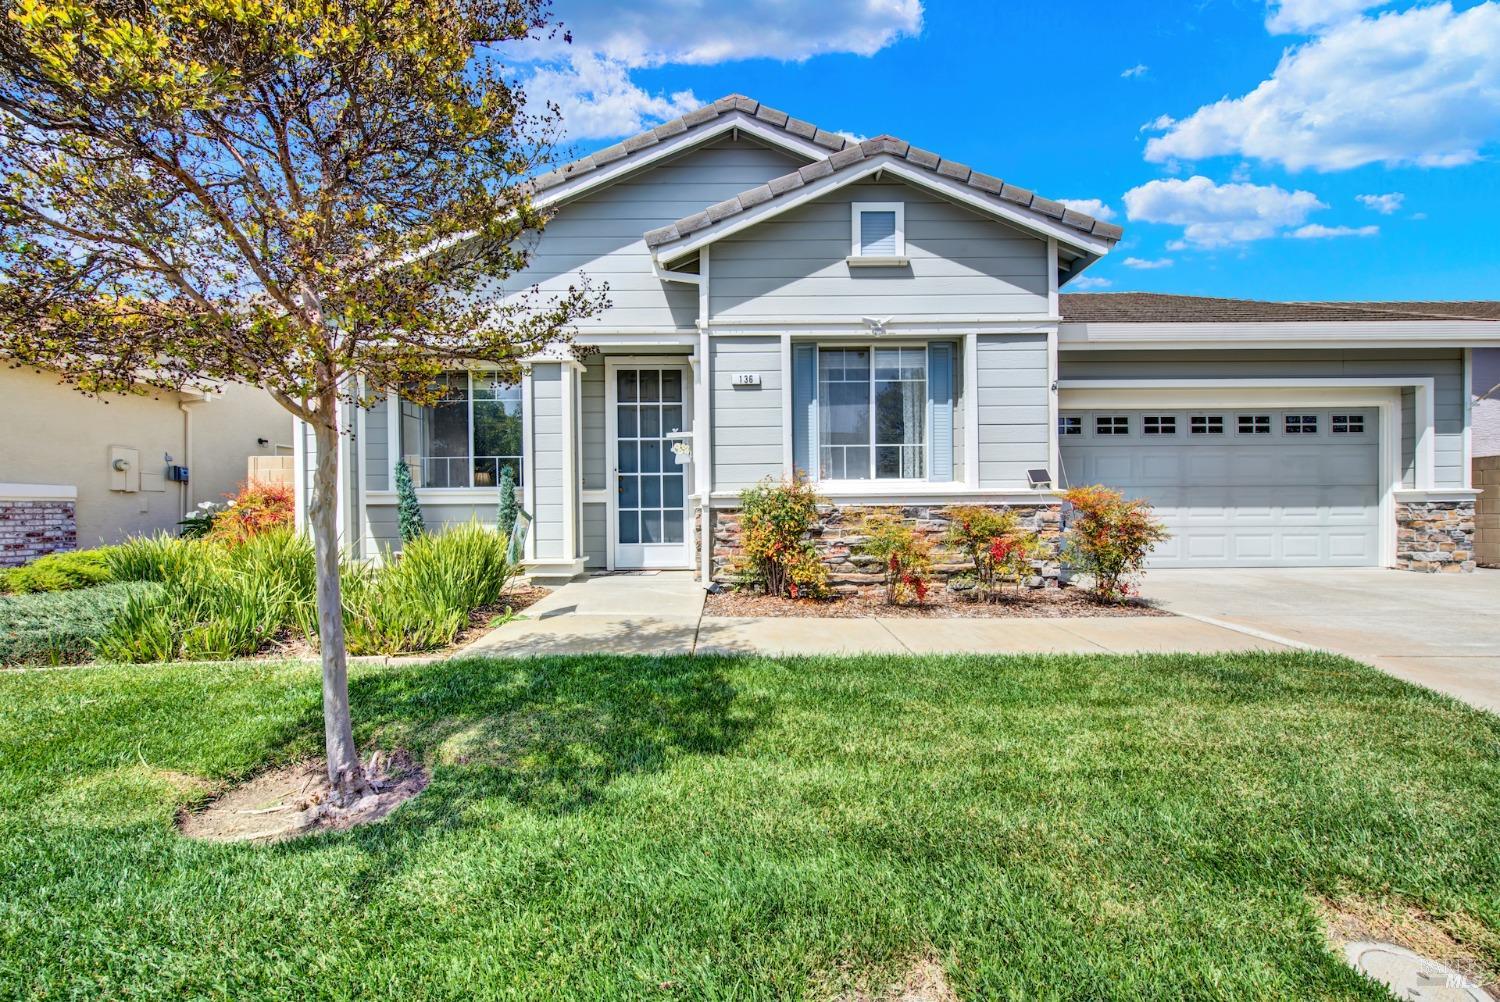 Photo of 136 Currant Ln in Vacaville, CA